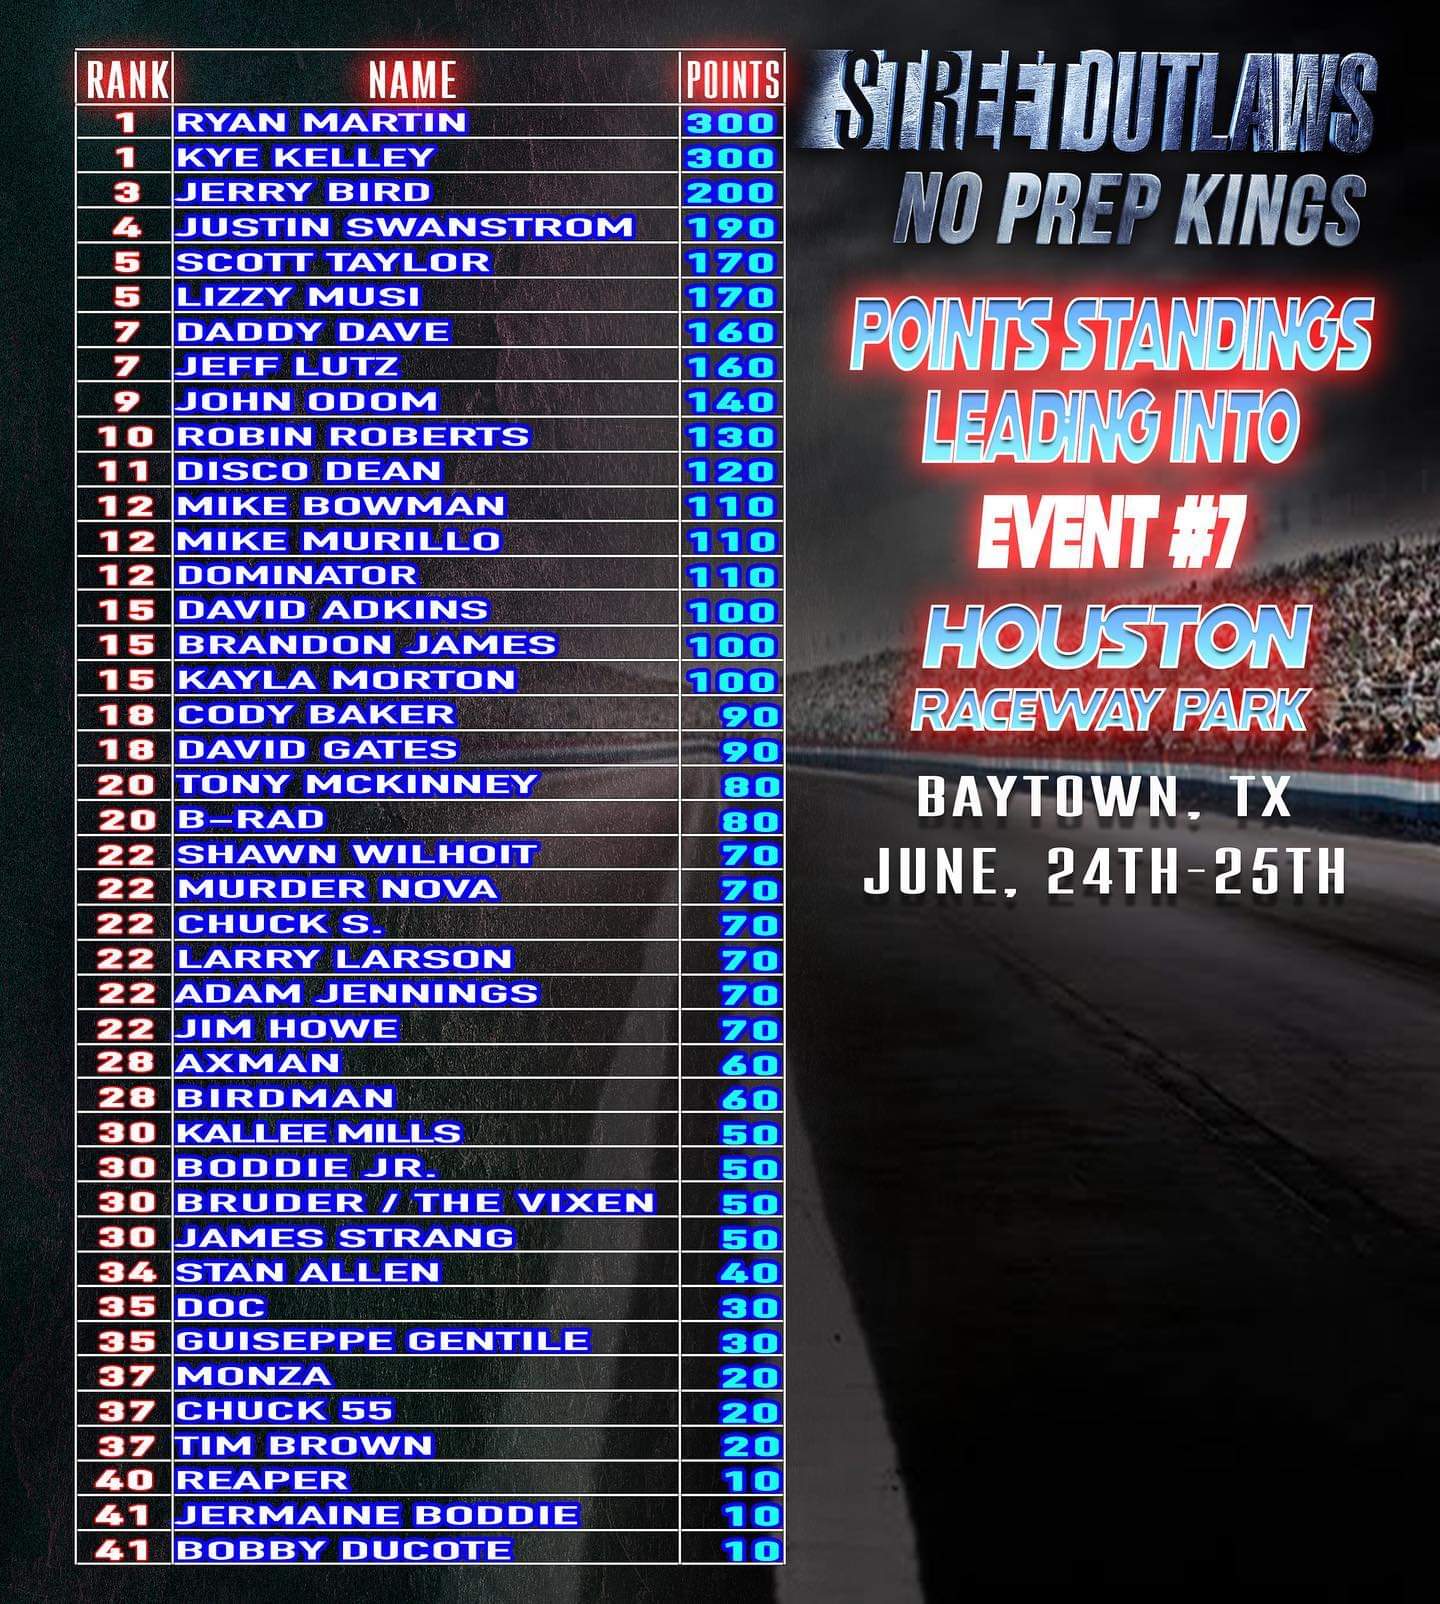 Street Outlaws No Prep Kings 2022 POINTS LEADERBOARD